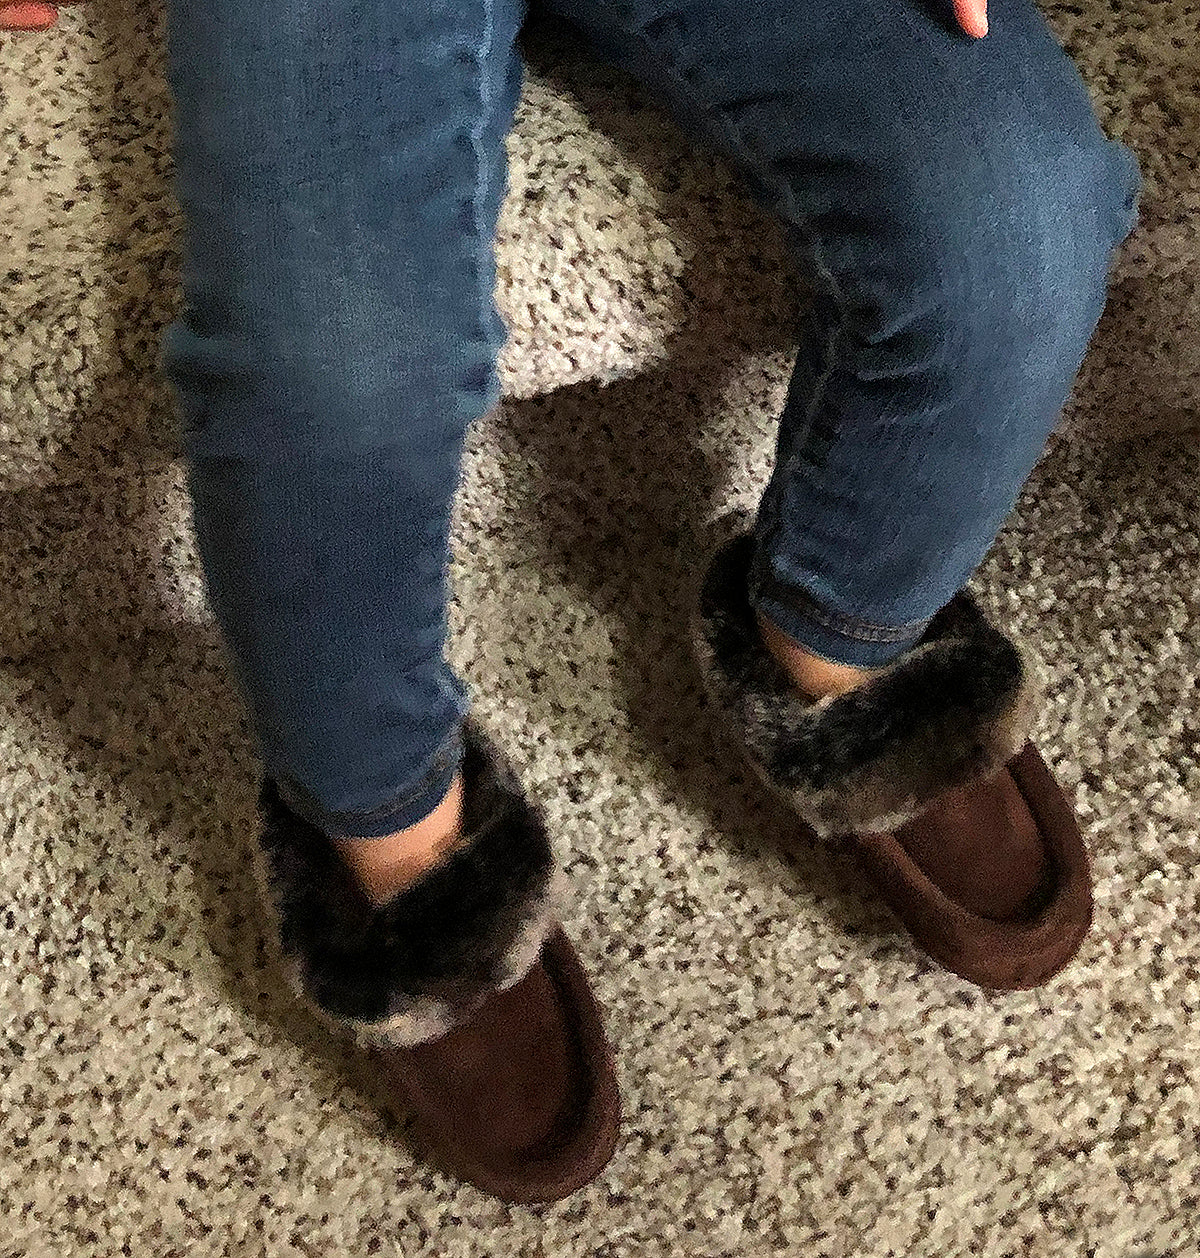 Children's Lined Faux Fur Moccasins (Final Clearance)